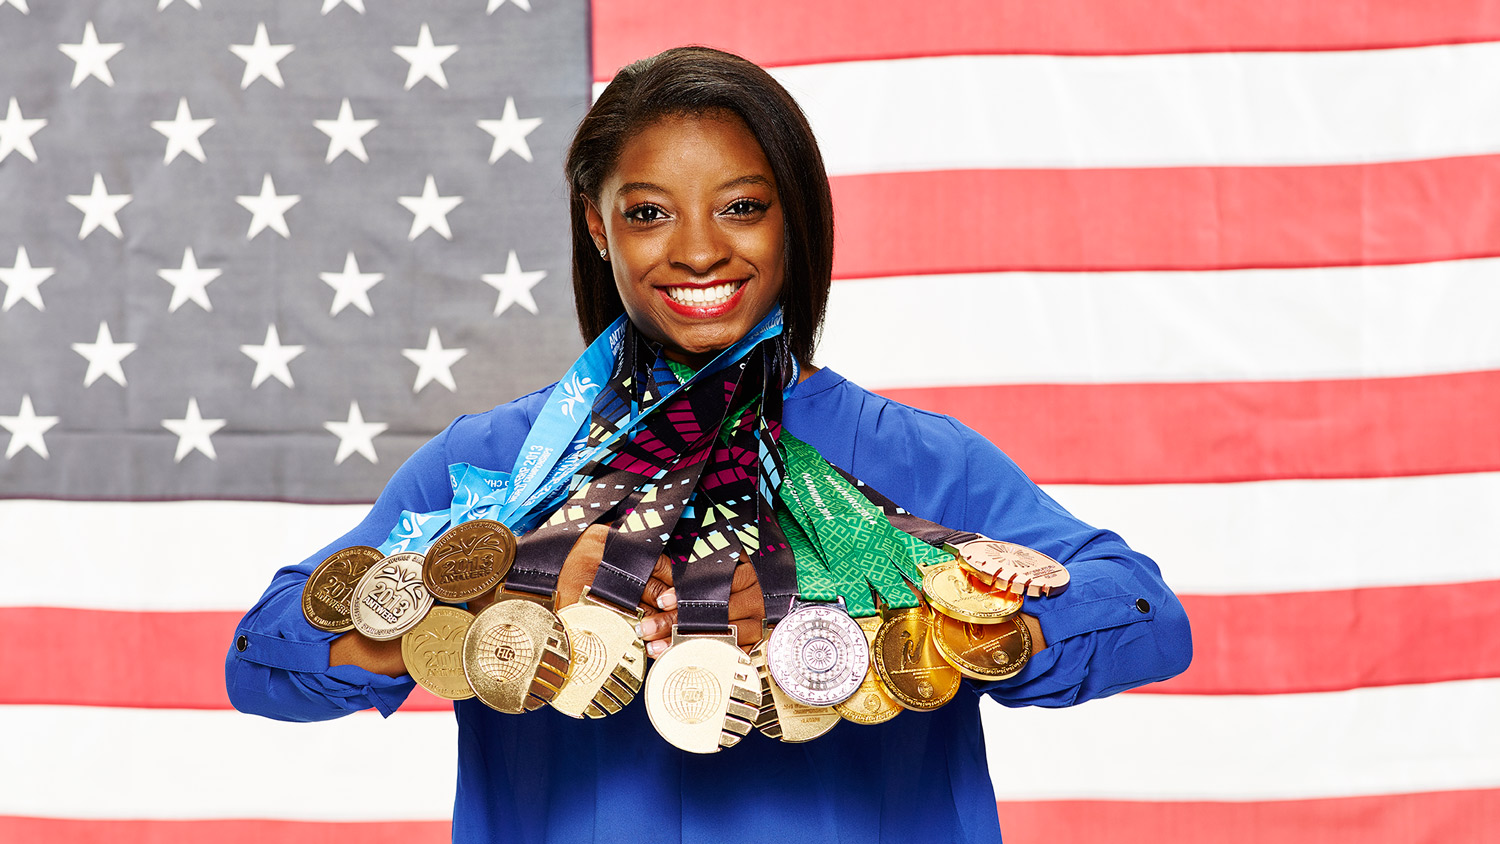 Simone Biles with gold medals